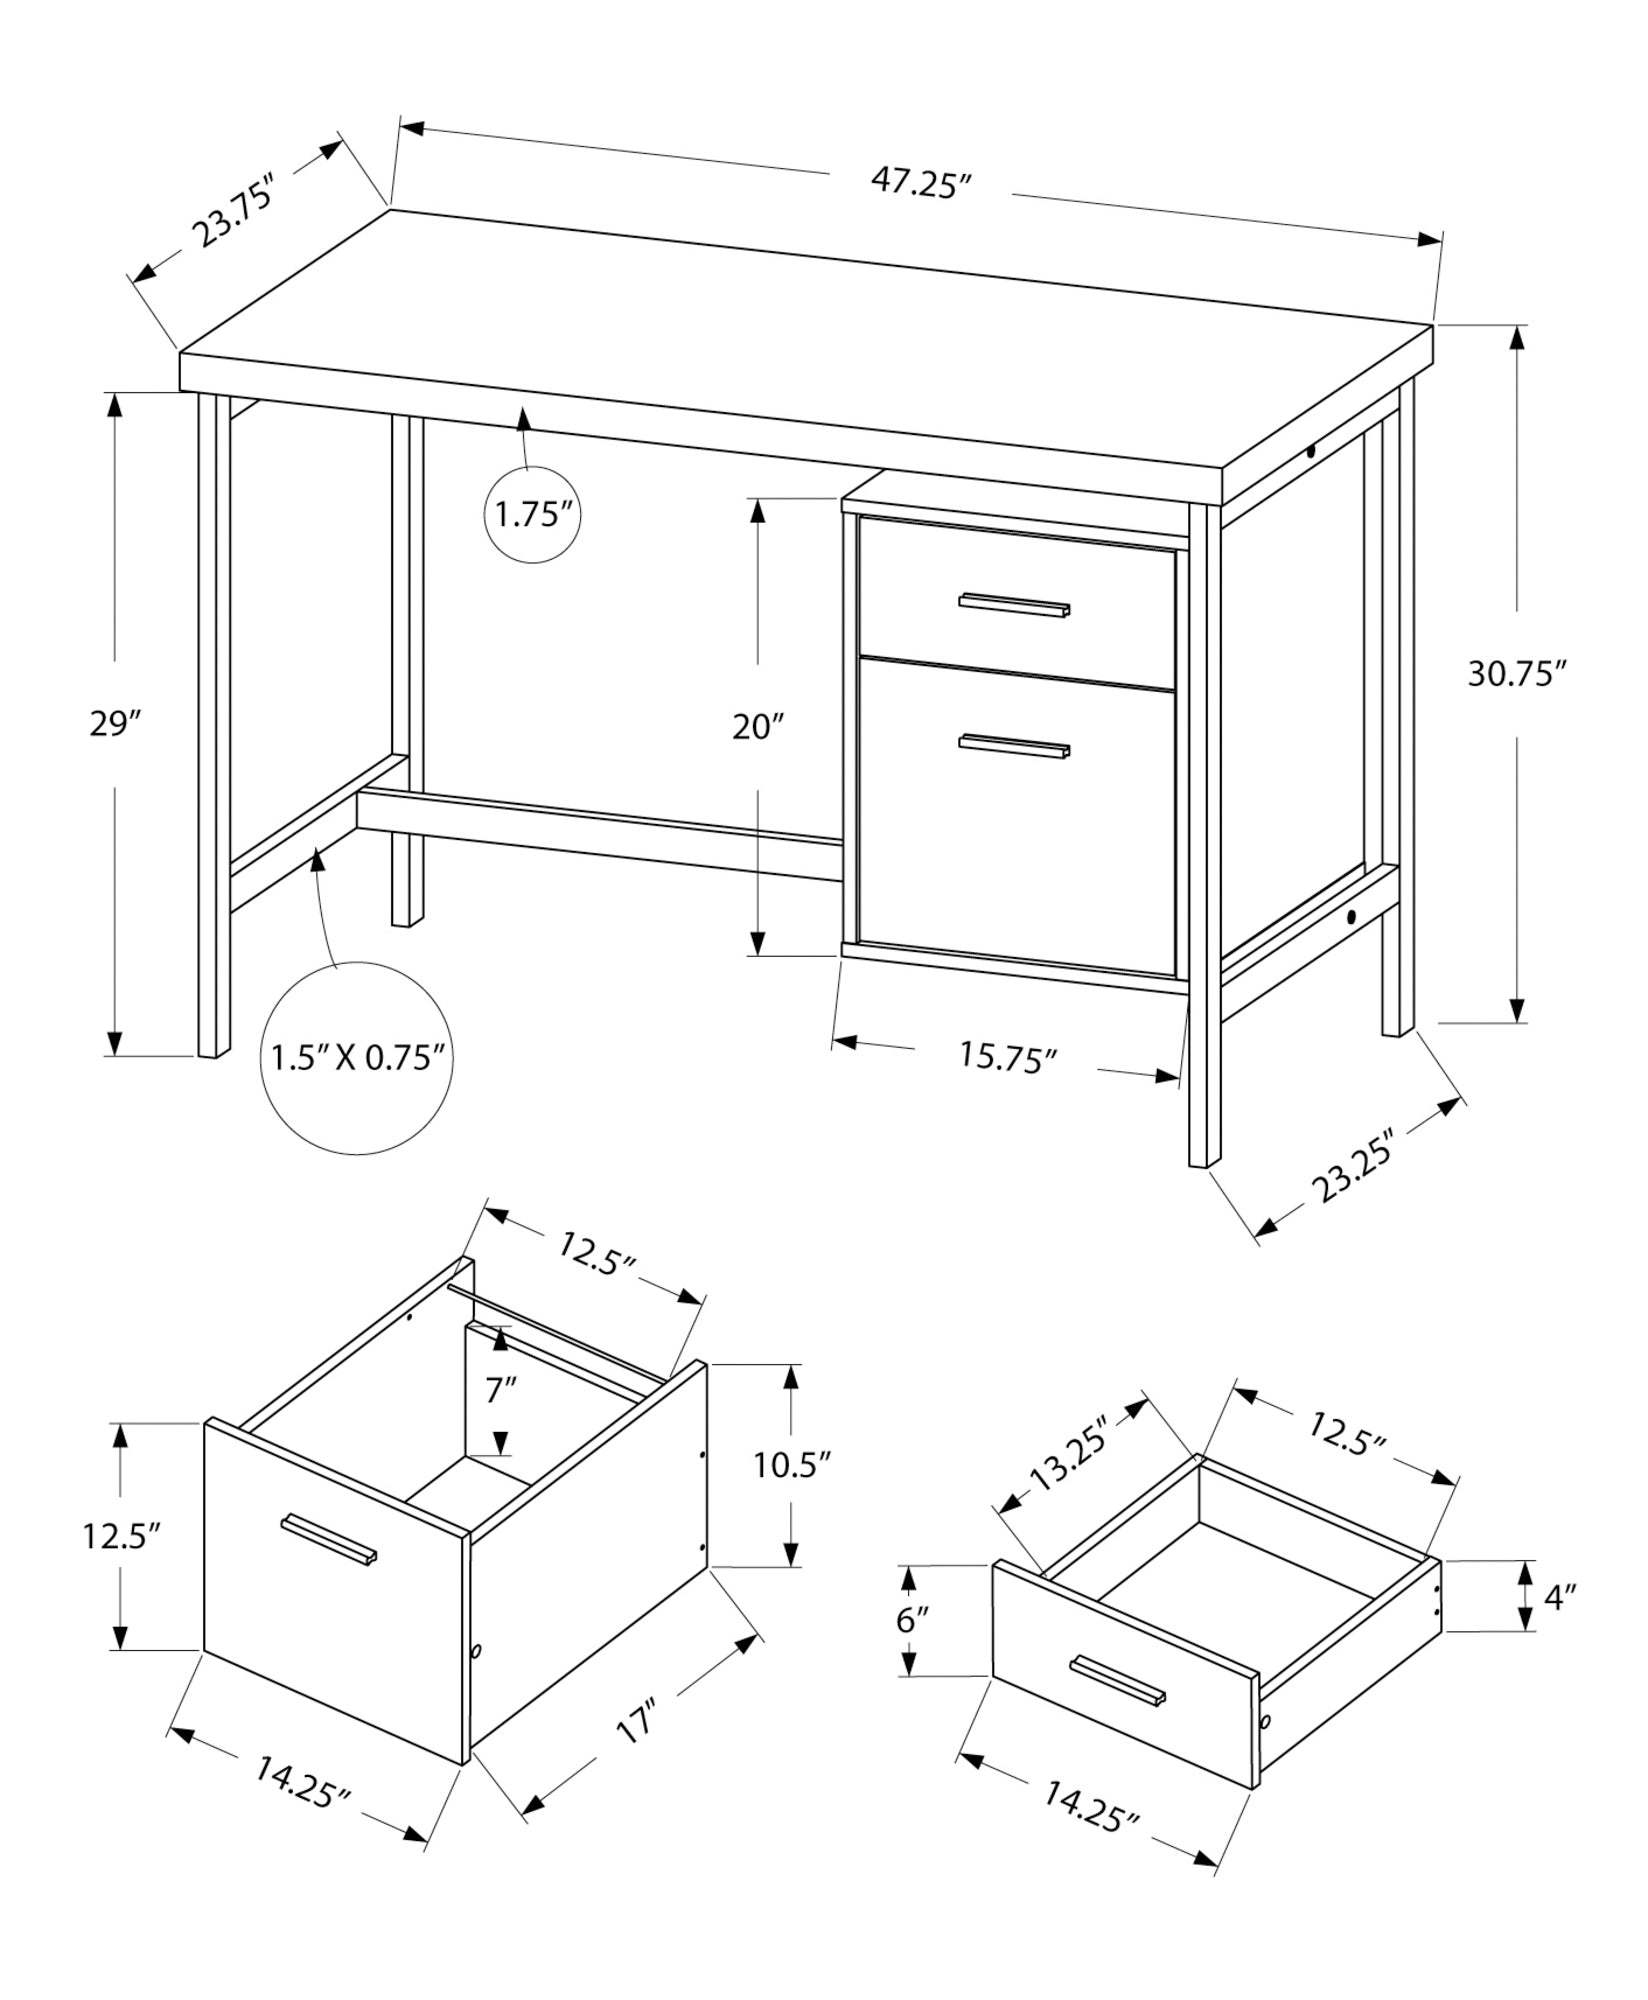 MN-227149    Computer Desk, Home Office, Laptop, Left, Right Set-Up, Storage Drawers, 48"L, Metal, Laminate, White, Contemporary, Modern